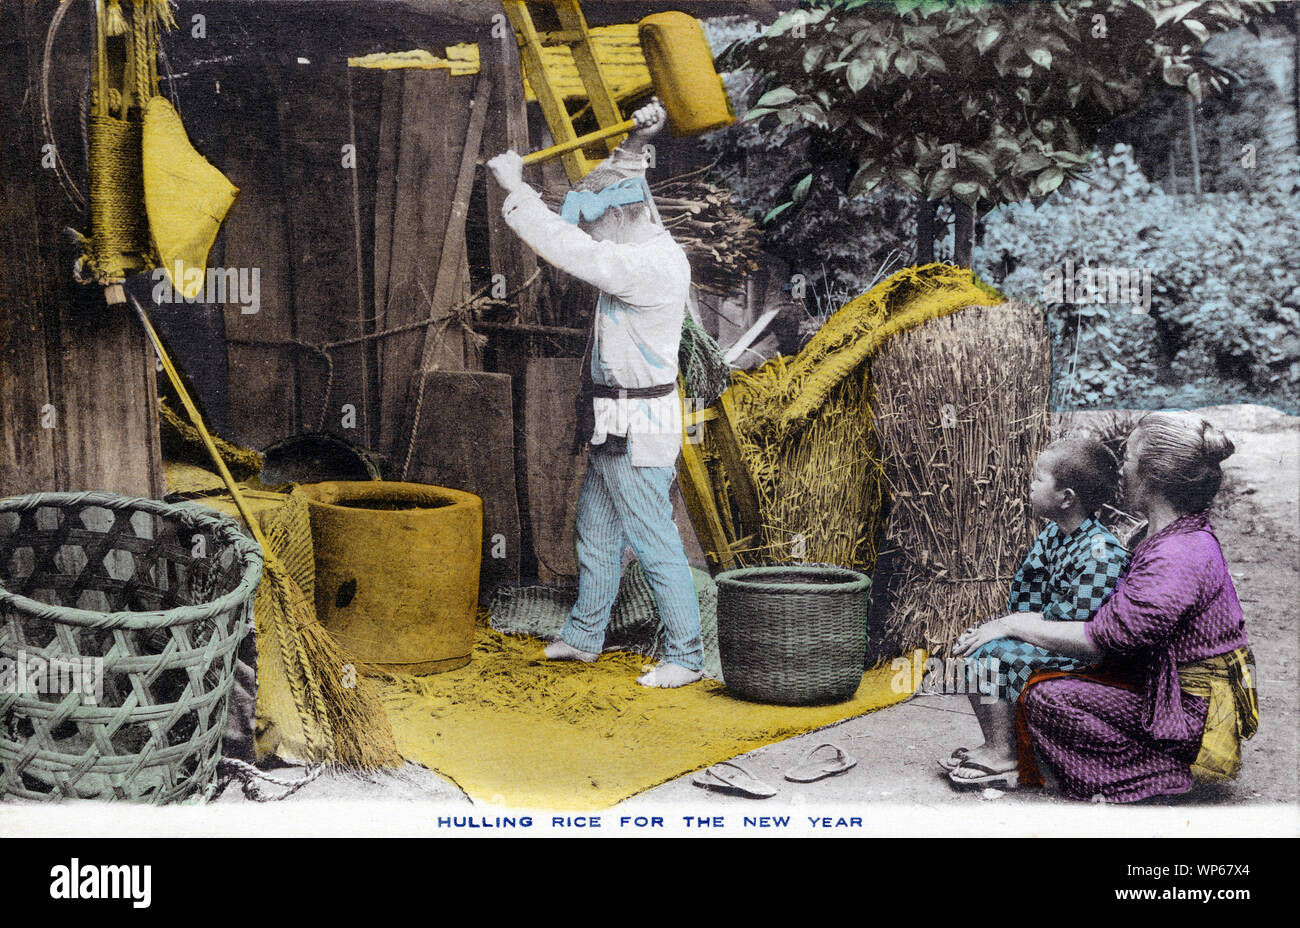 [ 1920s Japan - Japanese Farmer Hulling Rice ] —   A farmer is hulling rice while his wife and son, both wearing a yukata, look on.  This postcard is from a series about Japanese farming, called Farmer Life in Japan.  20th century vintage postcard. Stock Photo